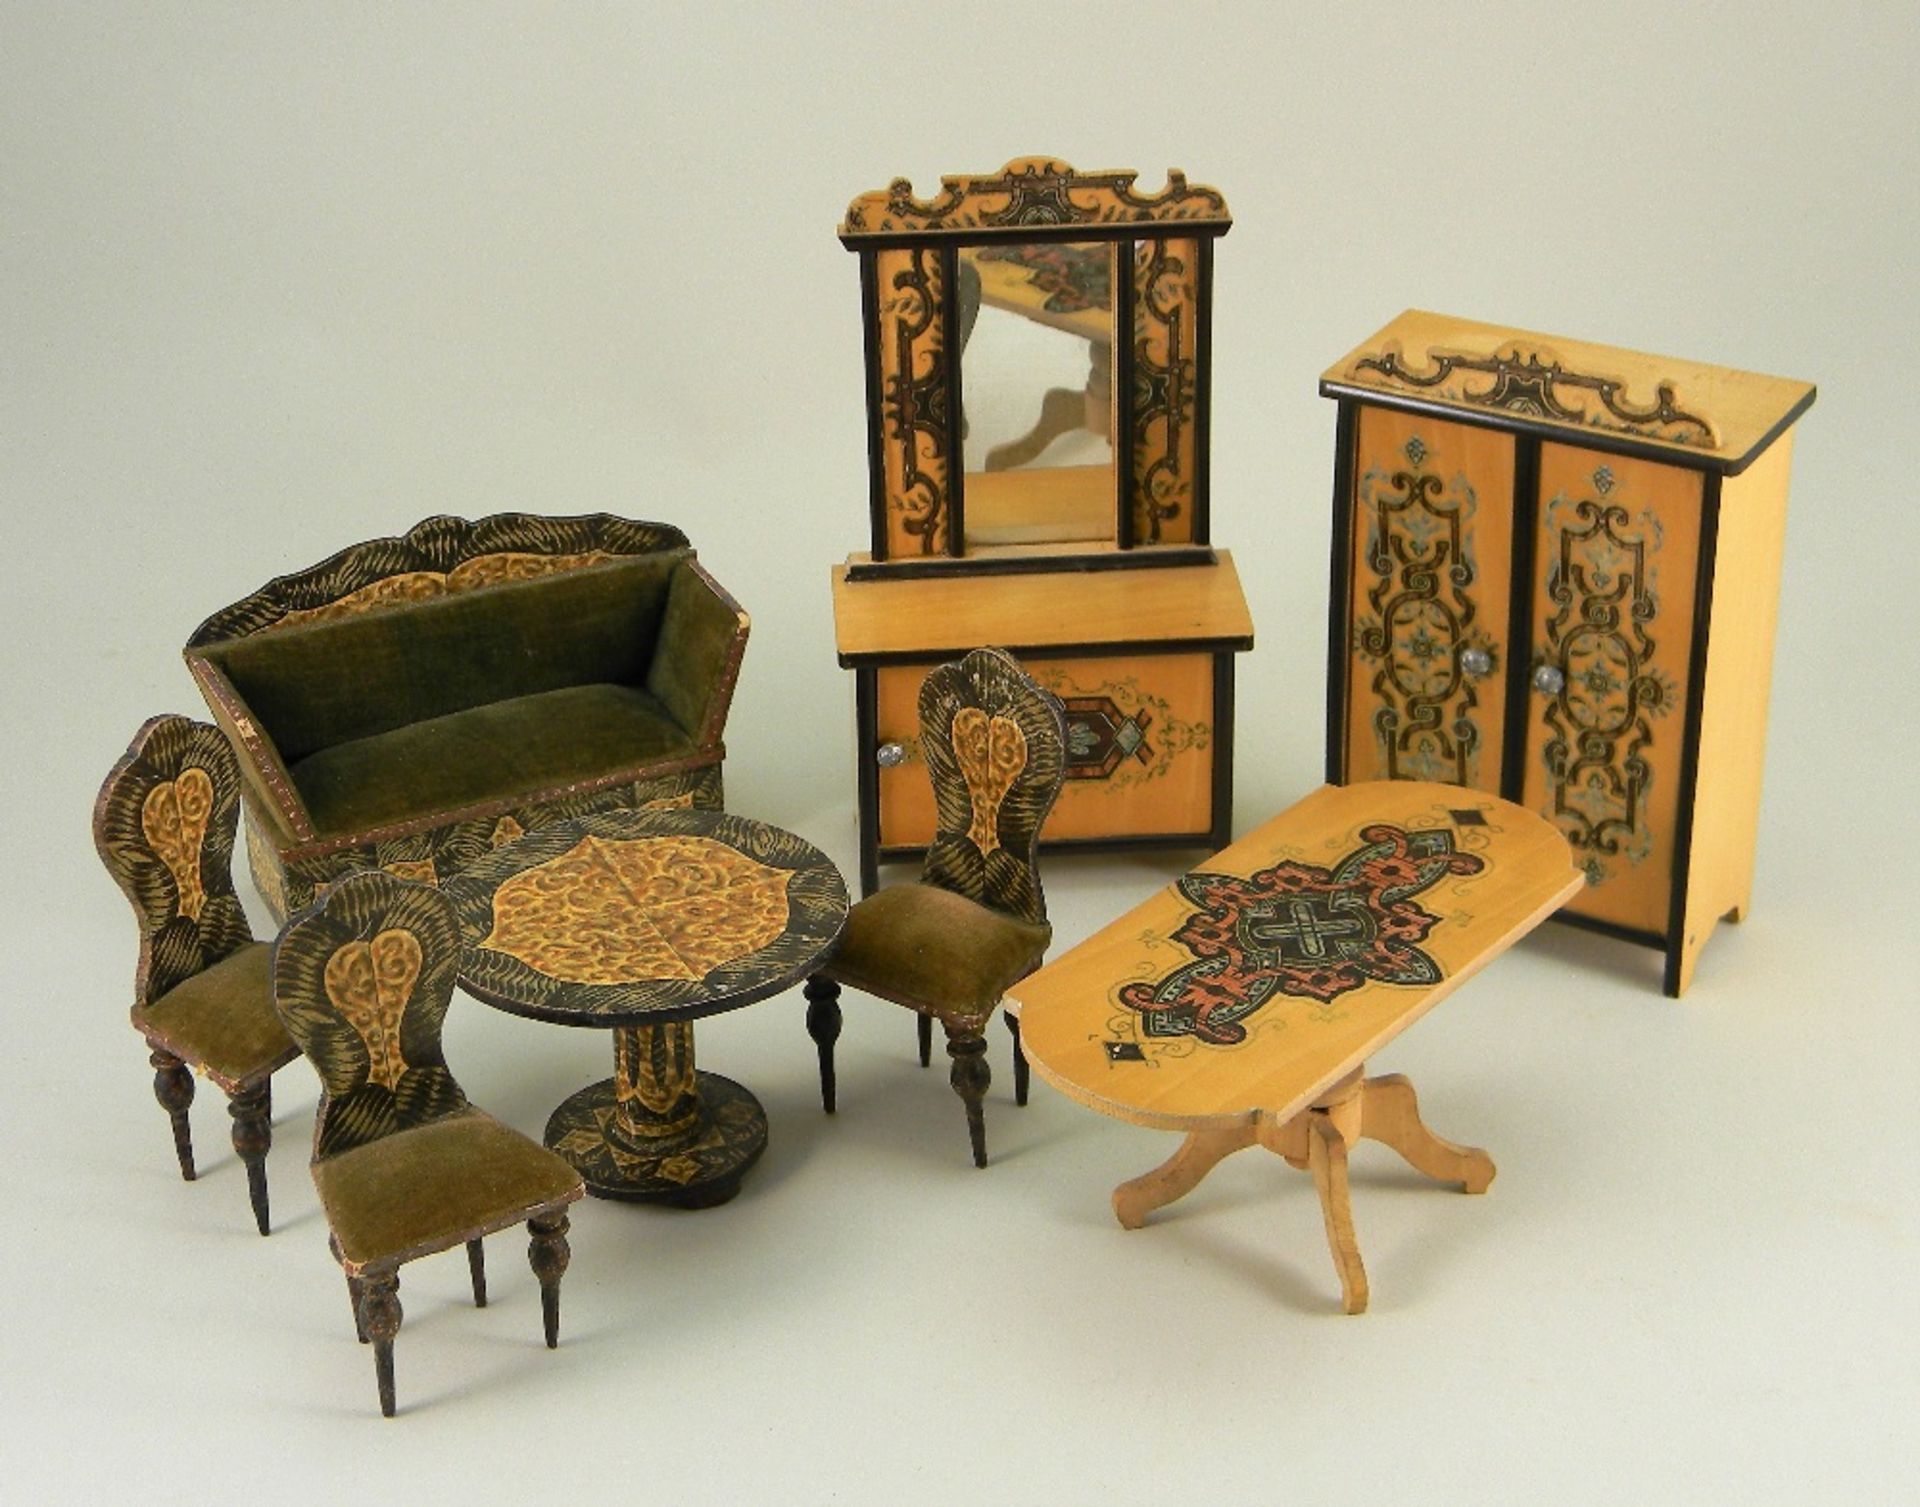 Selection of decorative wooden doll house furniture, German circa 1890,